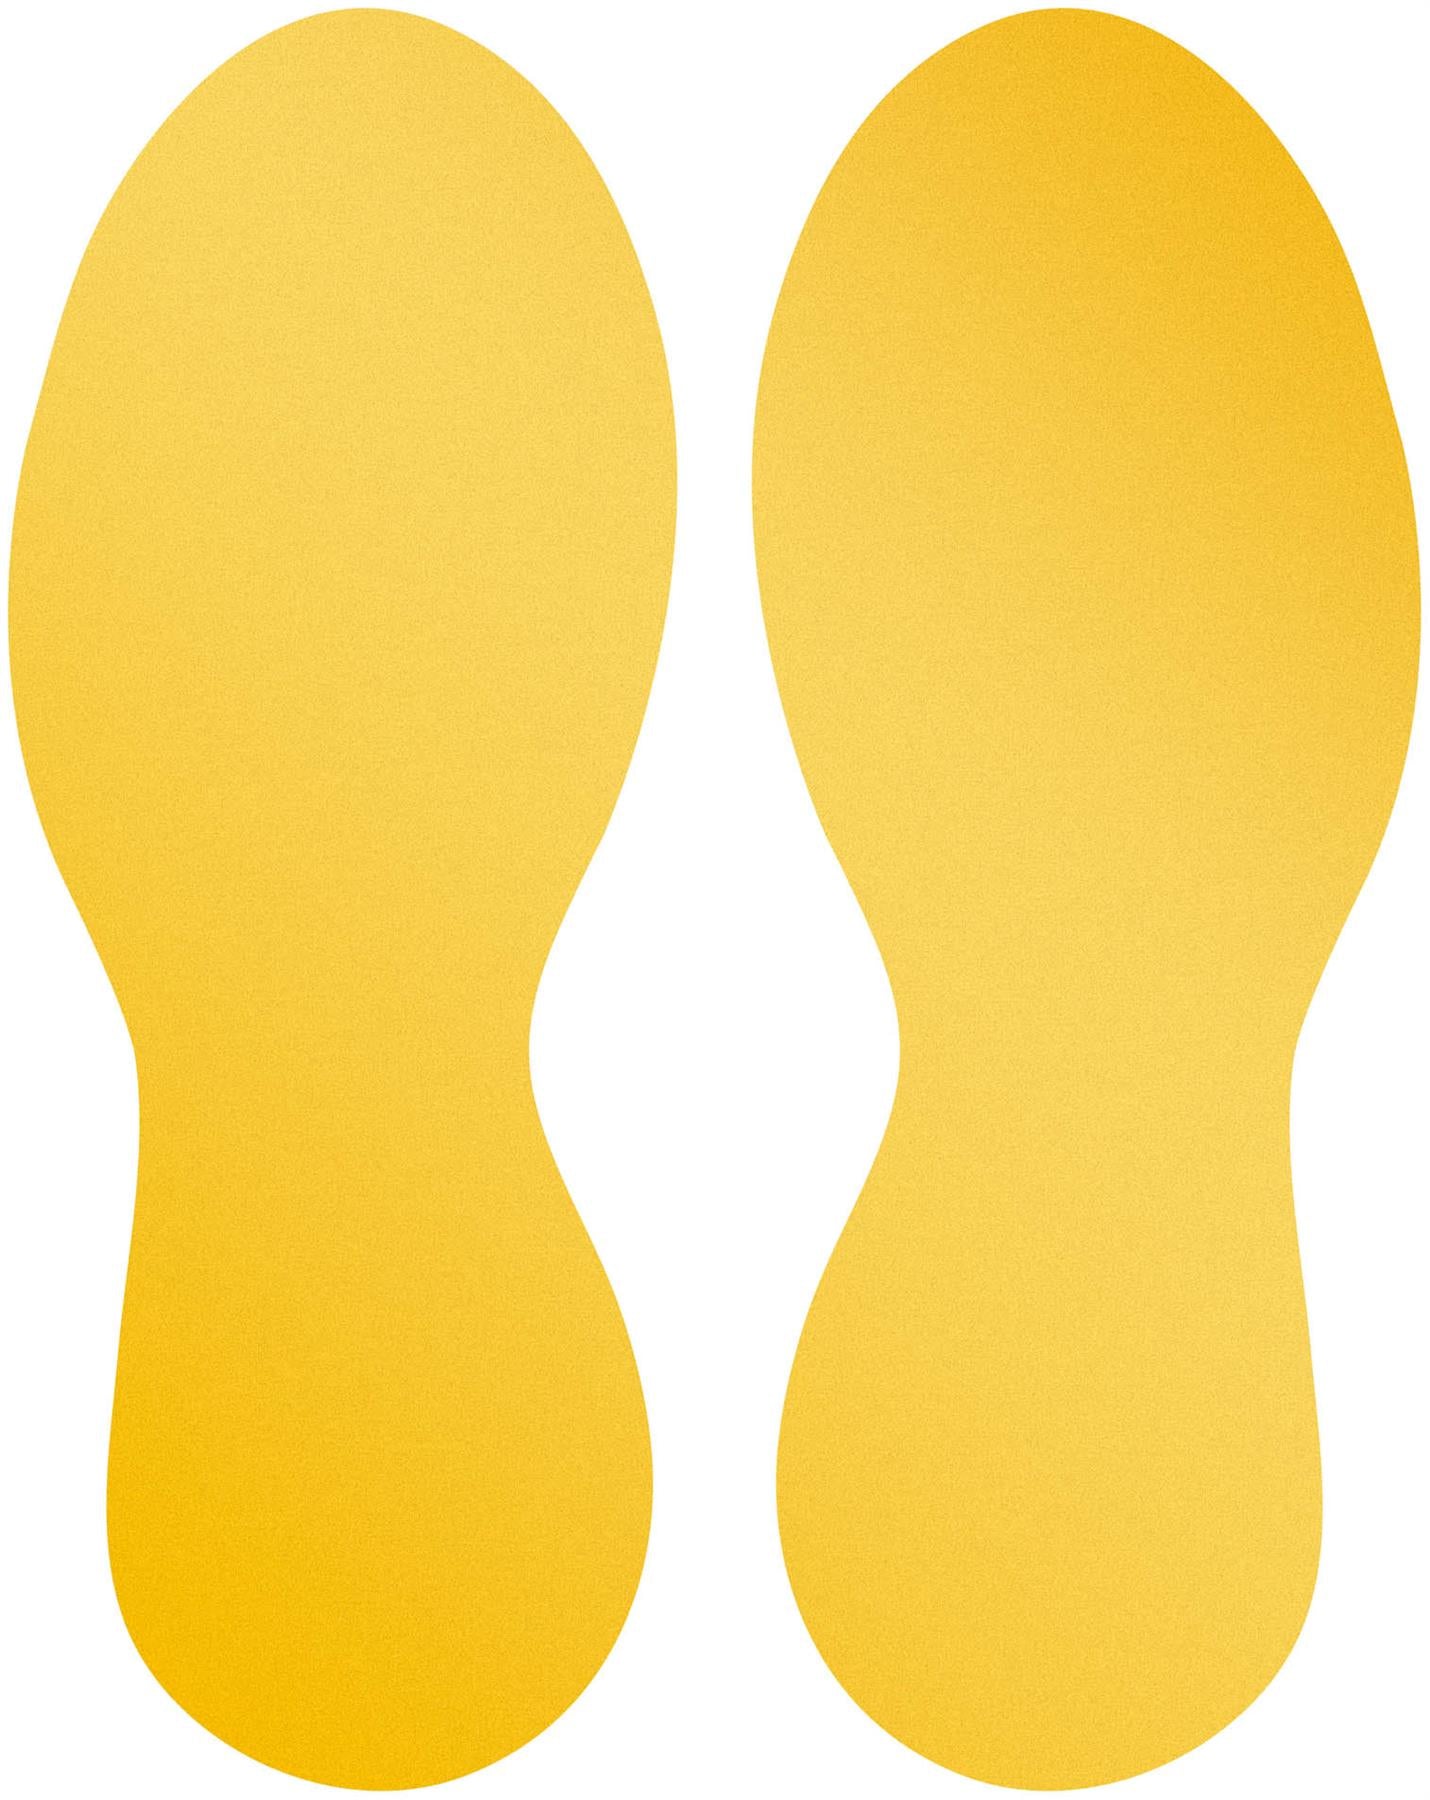 Durable Adhesive Feet Floor Sign Safety Foot Stickers | 5 Pairs | Yellow